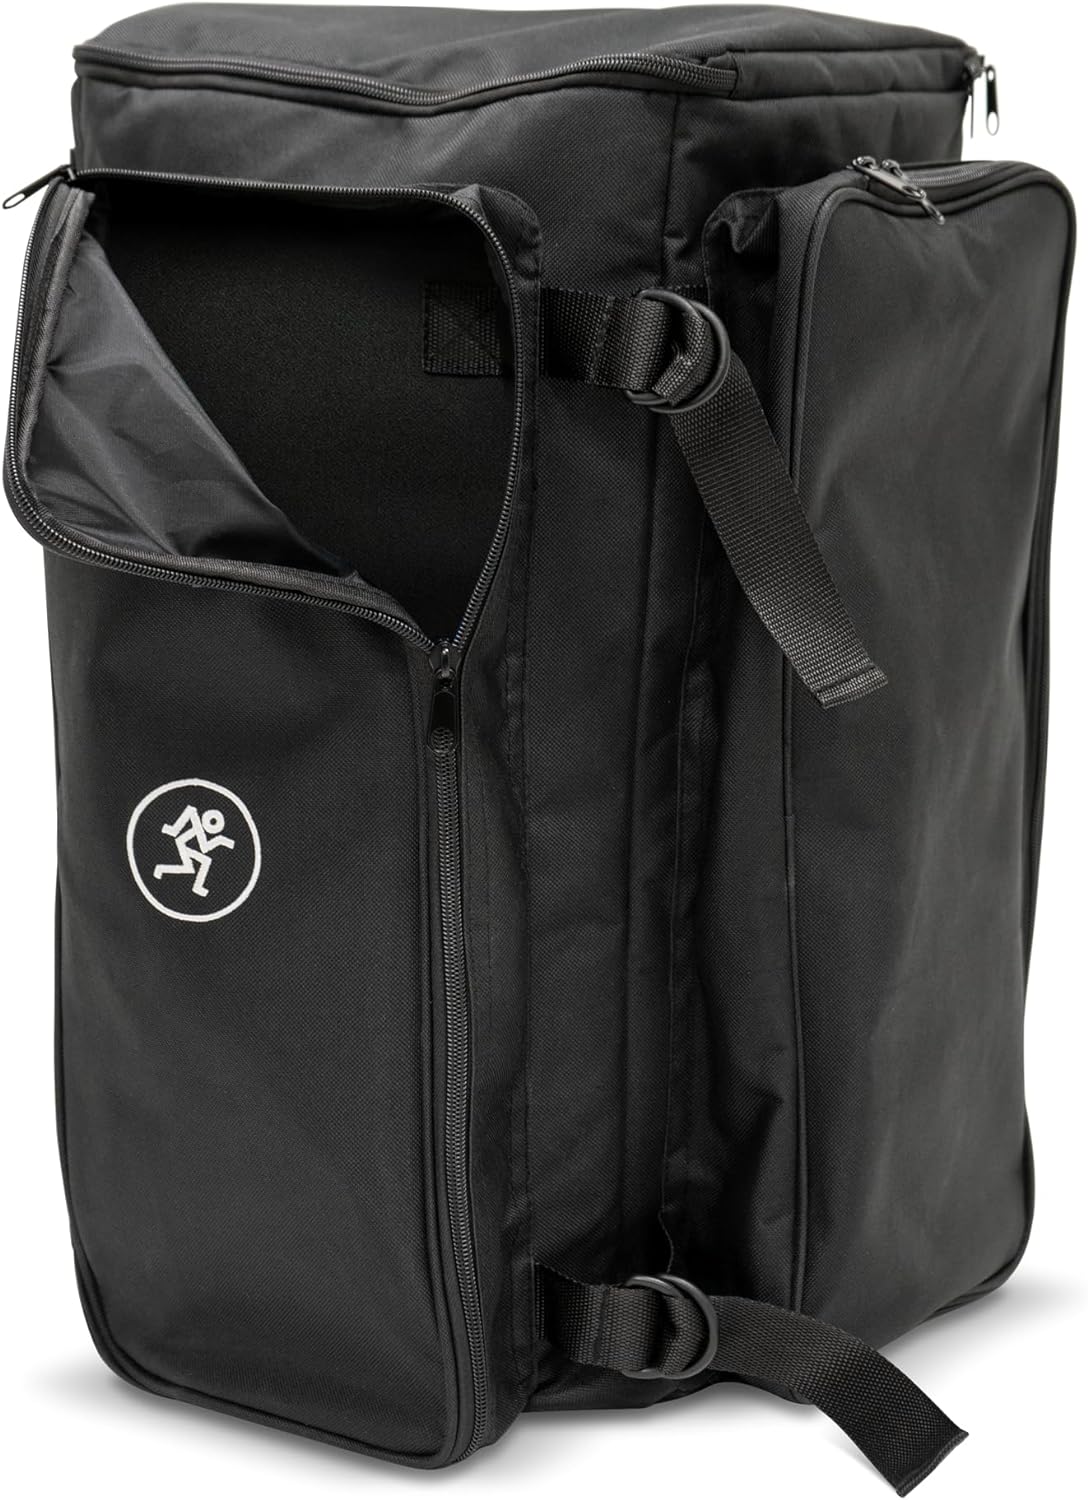 Mackie Gig Bag for ShowBox All-in-one Performance Rig with External Accessory Pockets